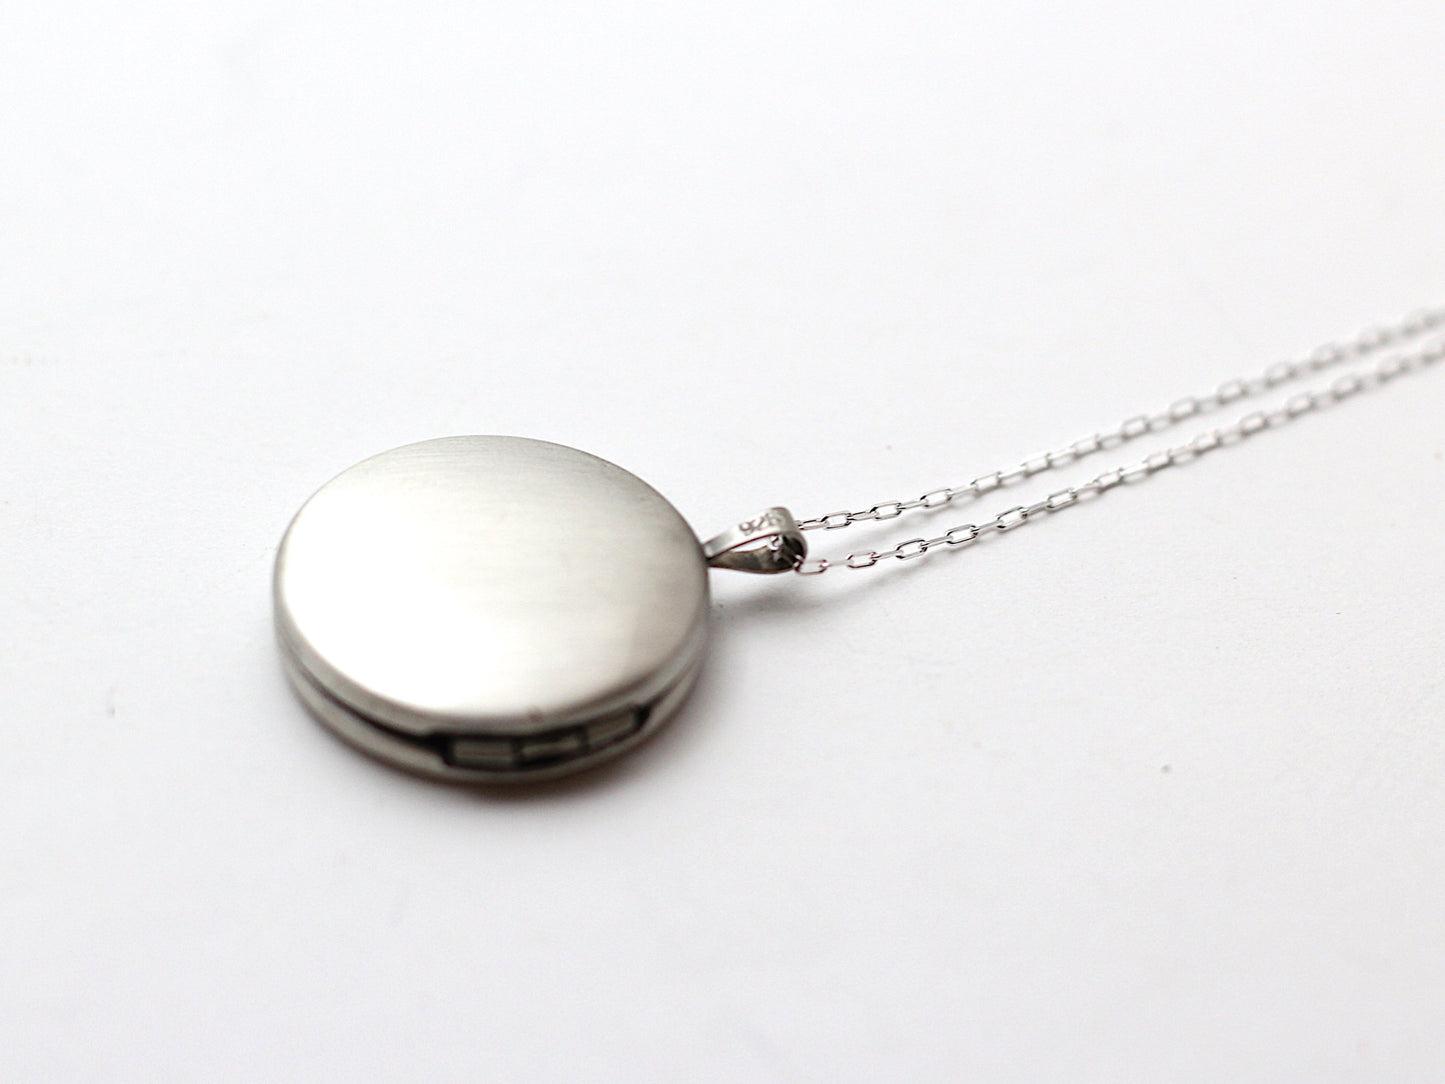 Marine Corps Button Silver Locket Necklace